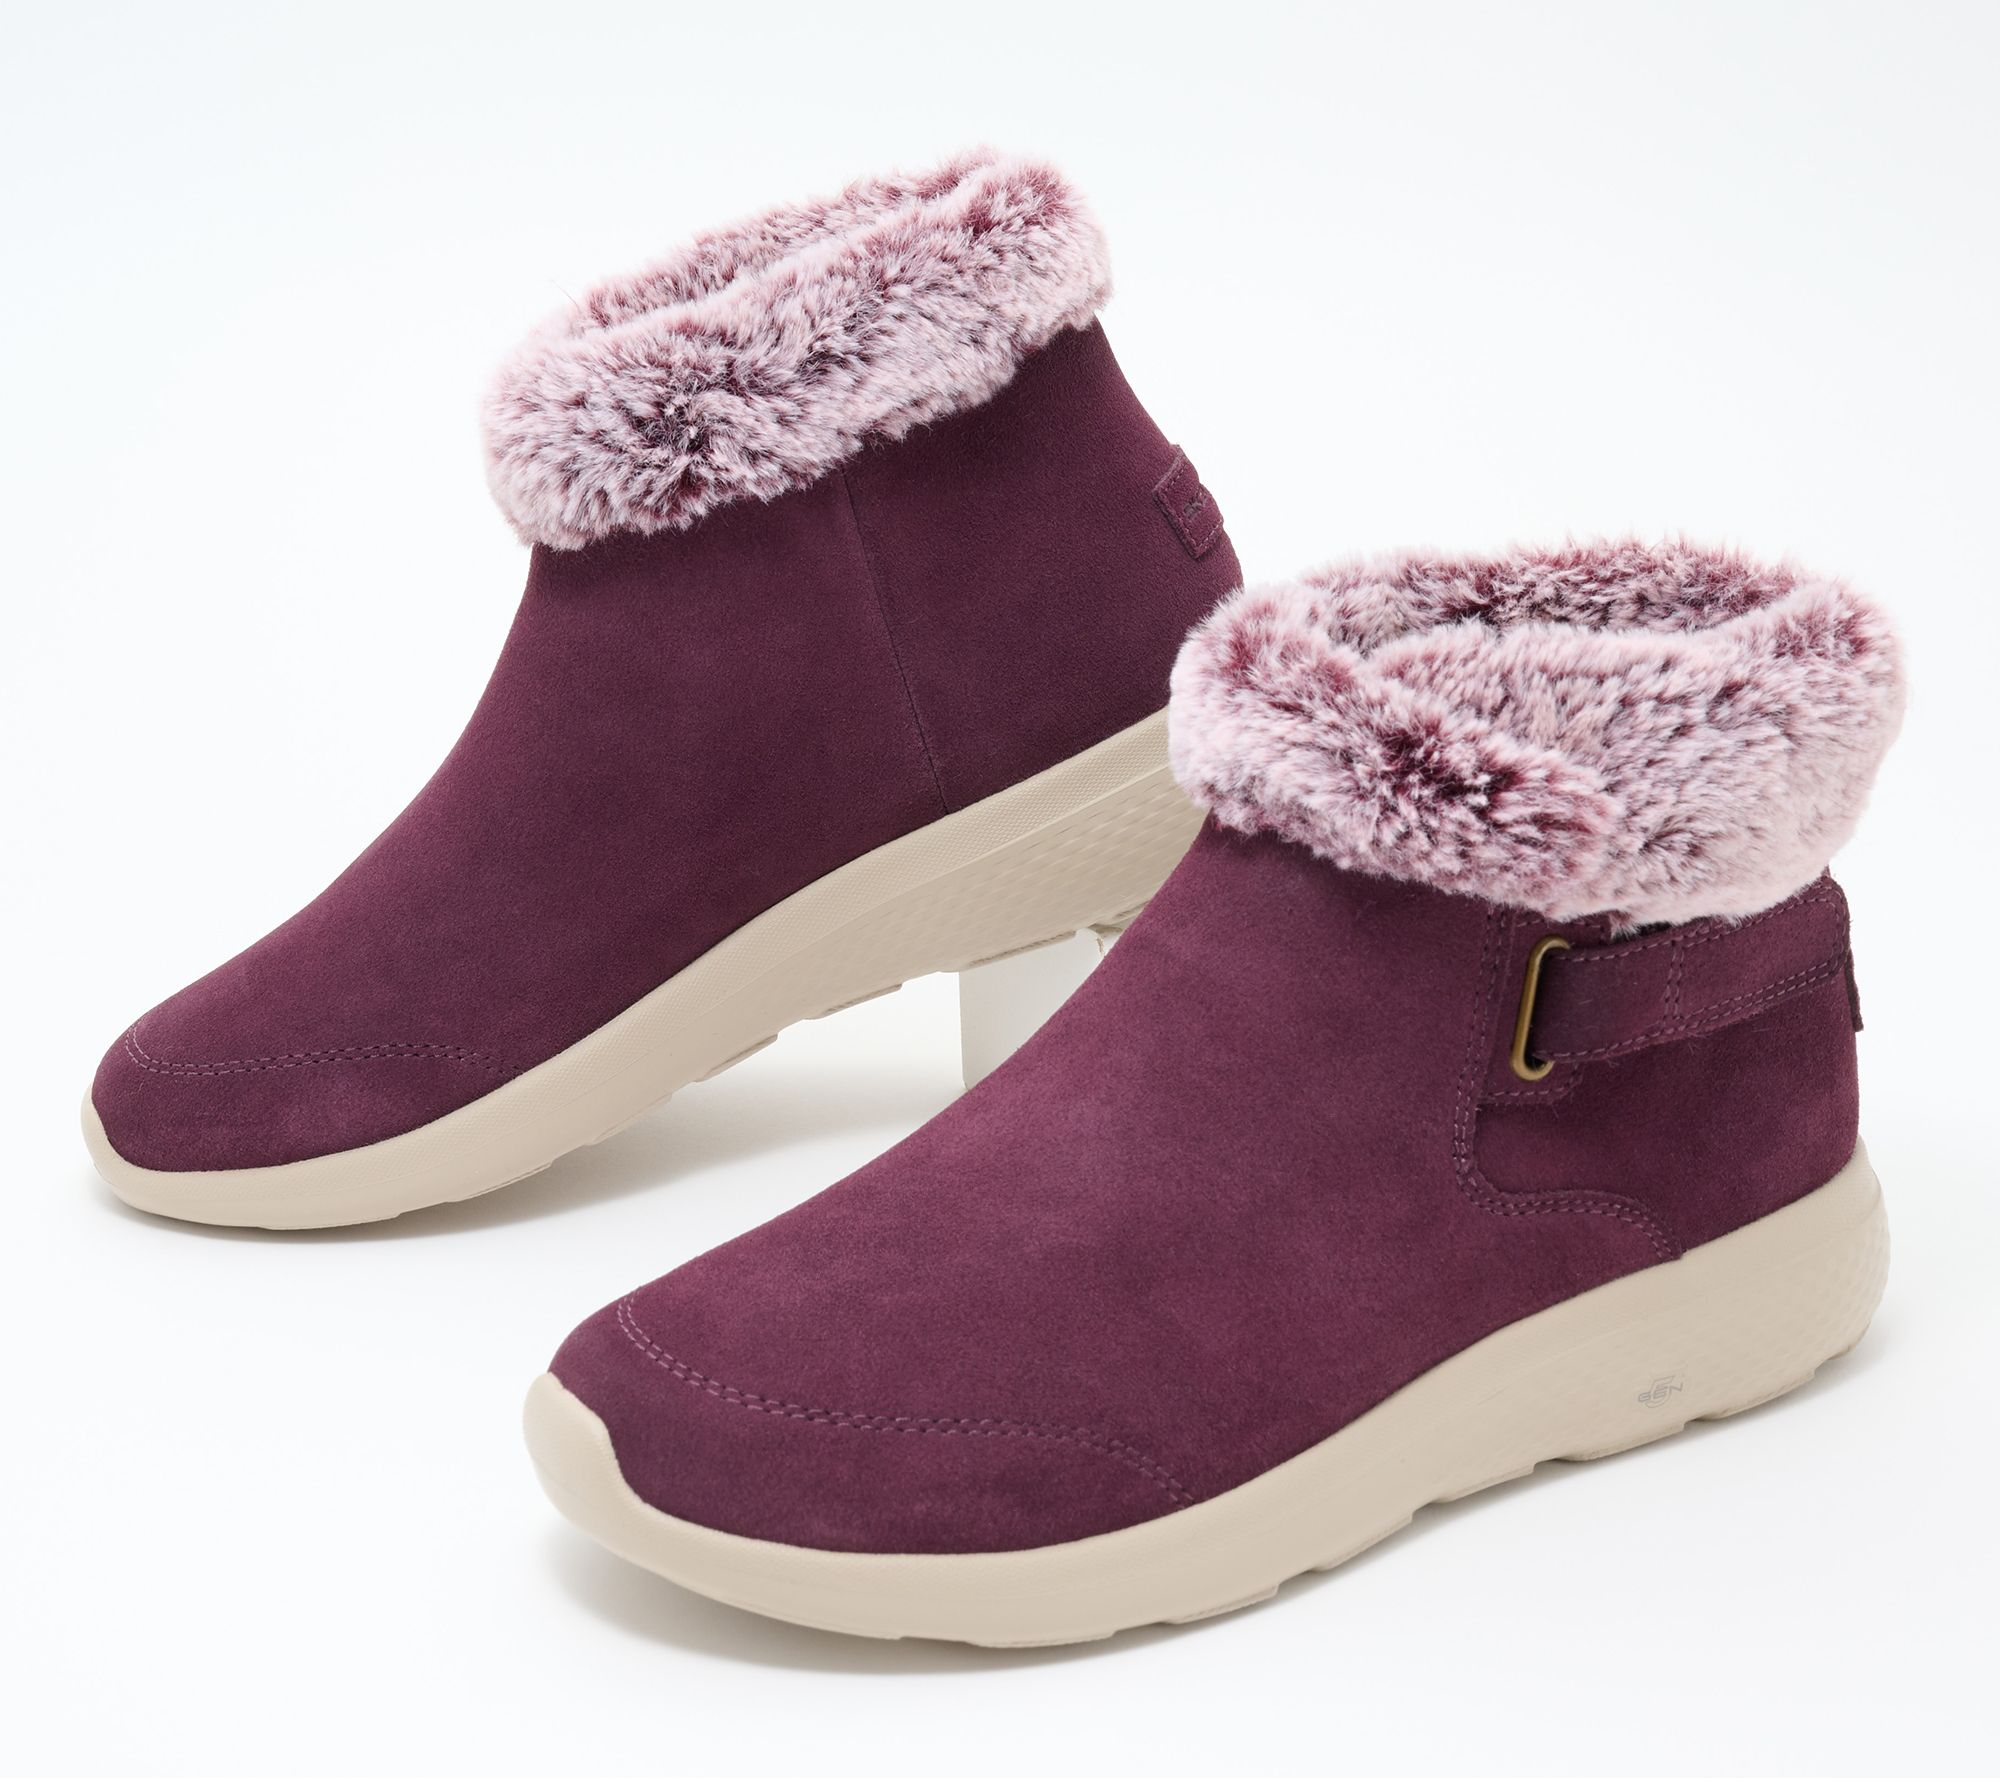 Skechers On the GO City 2 Suede Faux Fur Ankle Boots - Cuddle Up - QVC.com